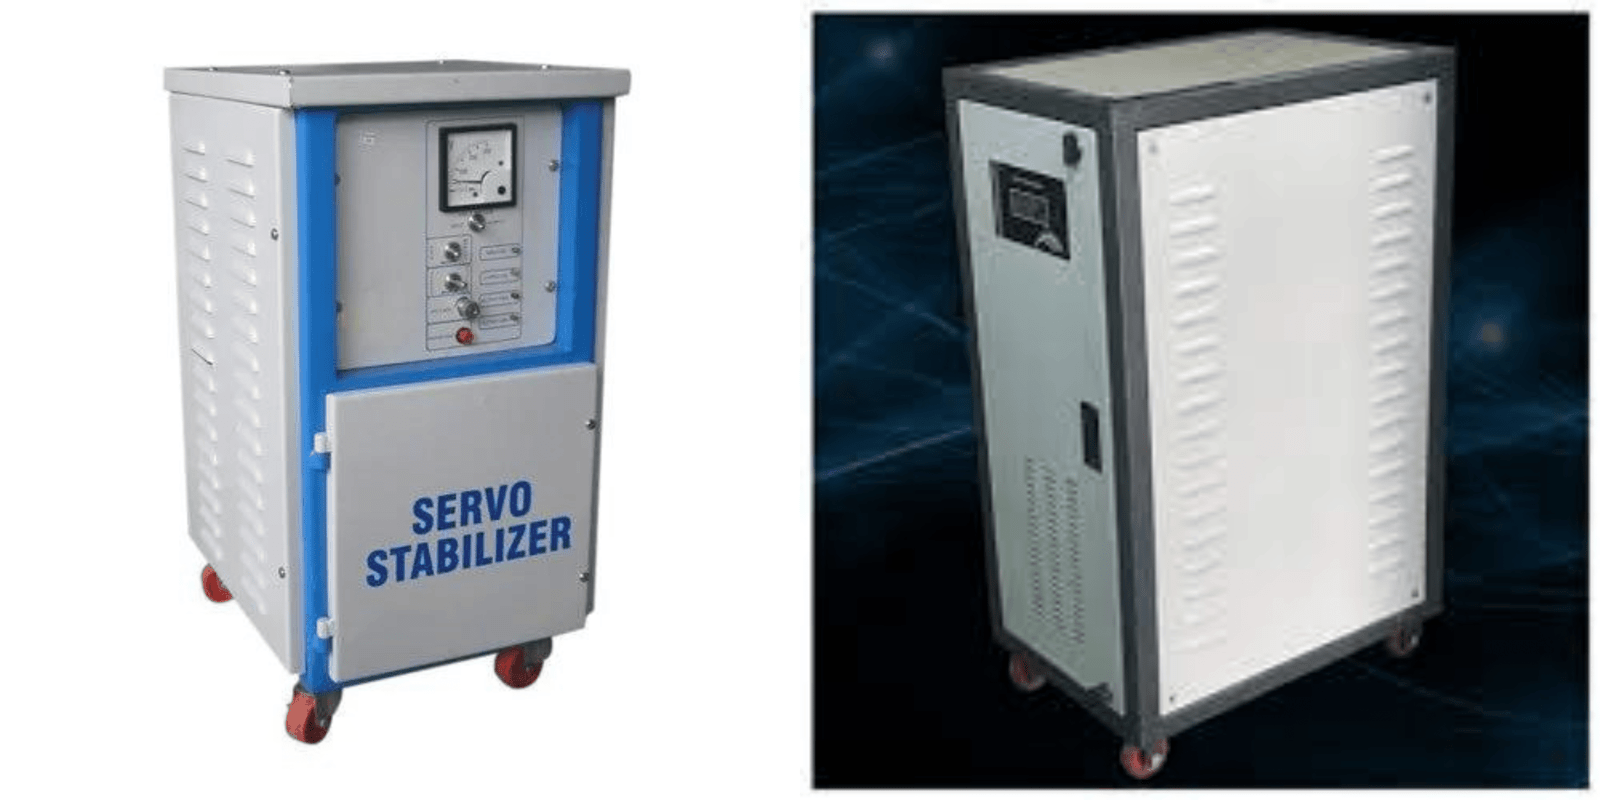 Differences between Servo Stabilizers and Static Stabilizers